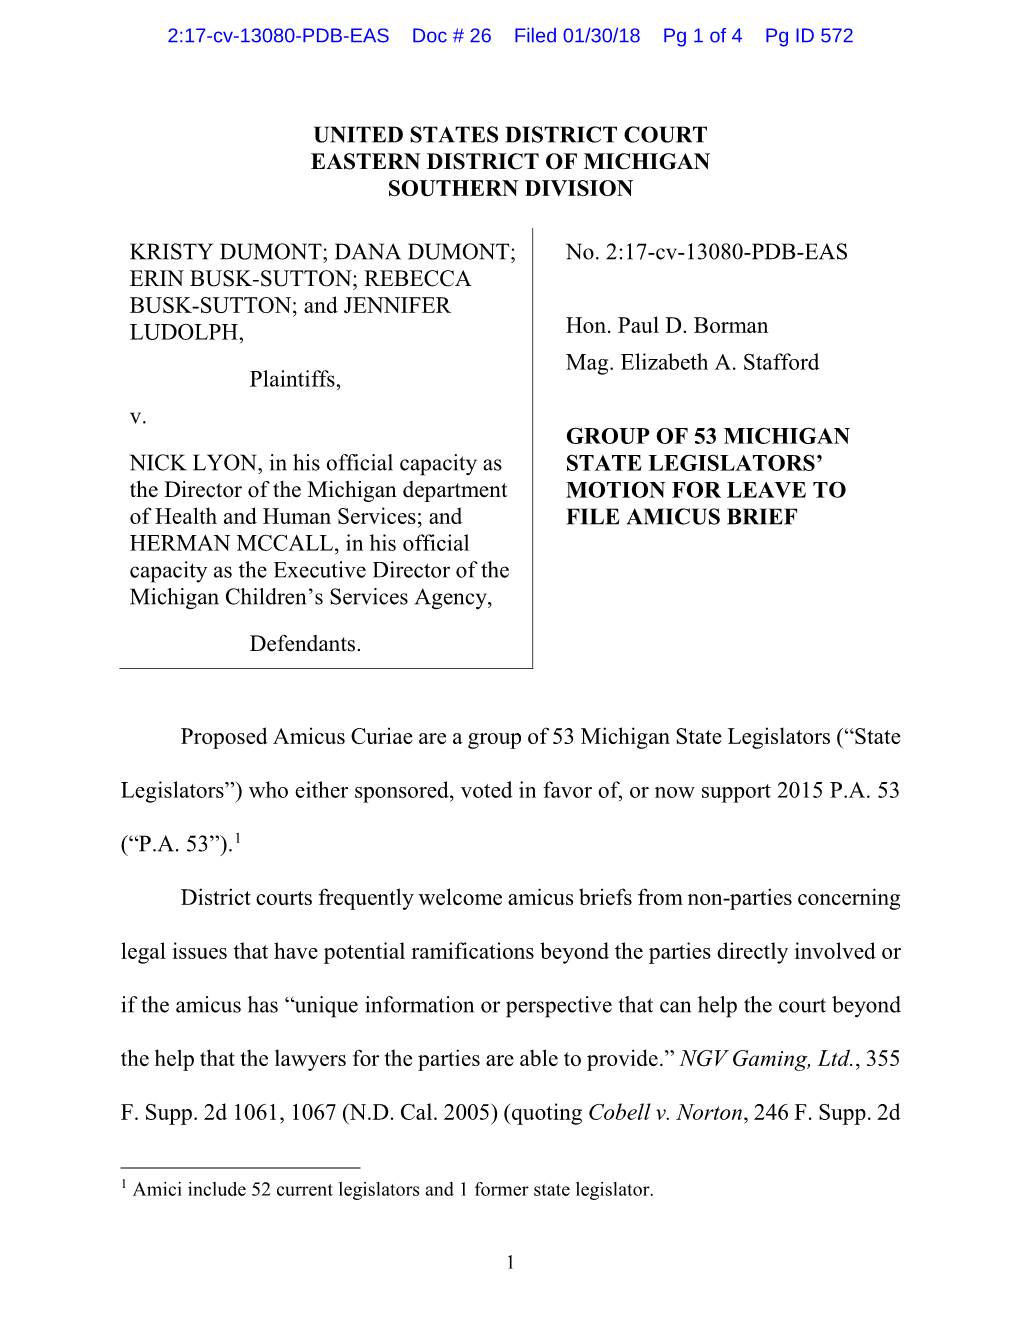 United States District Court Eastern District of Michigan Southern Division Kristy Dumont; Dana Dumont; Erin Busk-Sutton; Rebecc